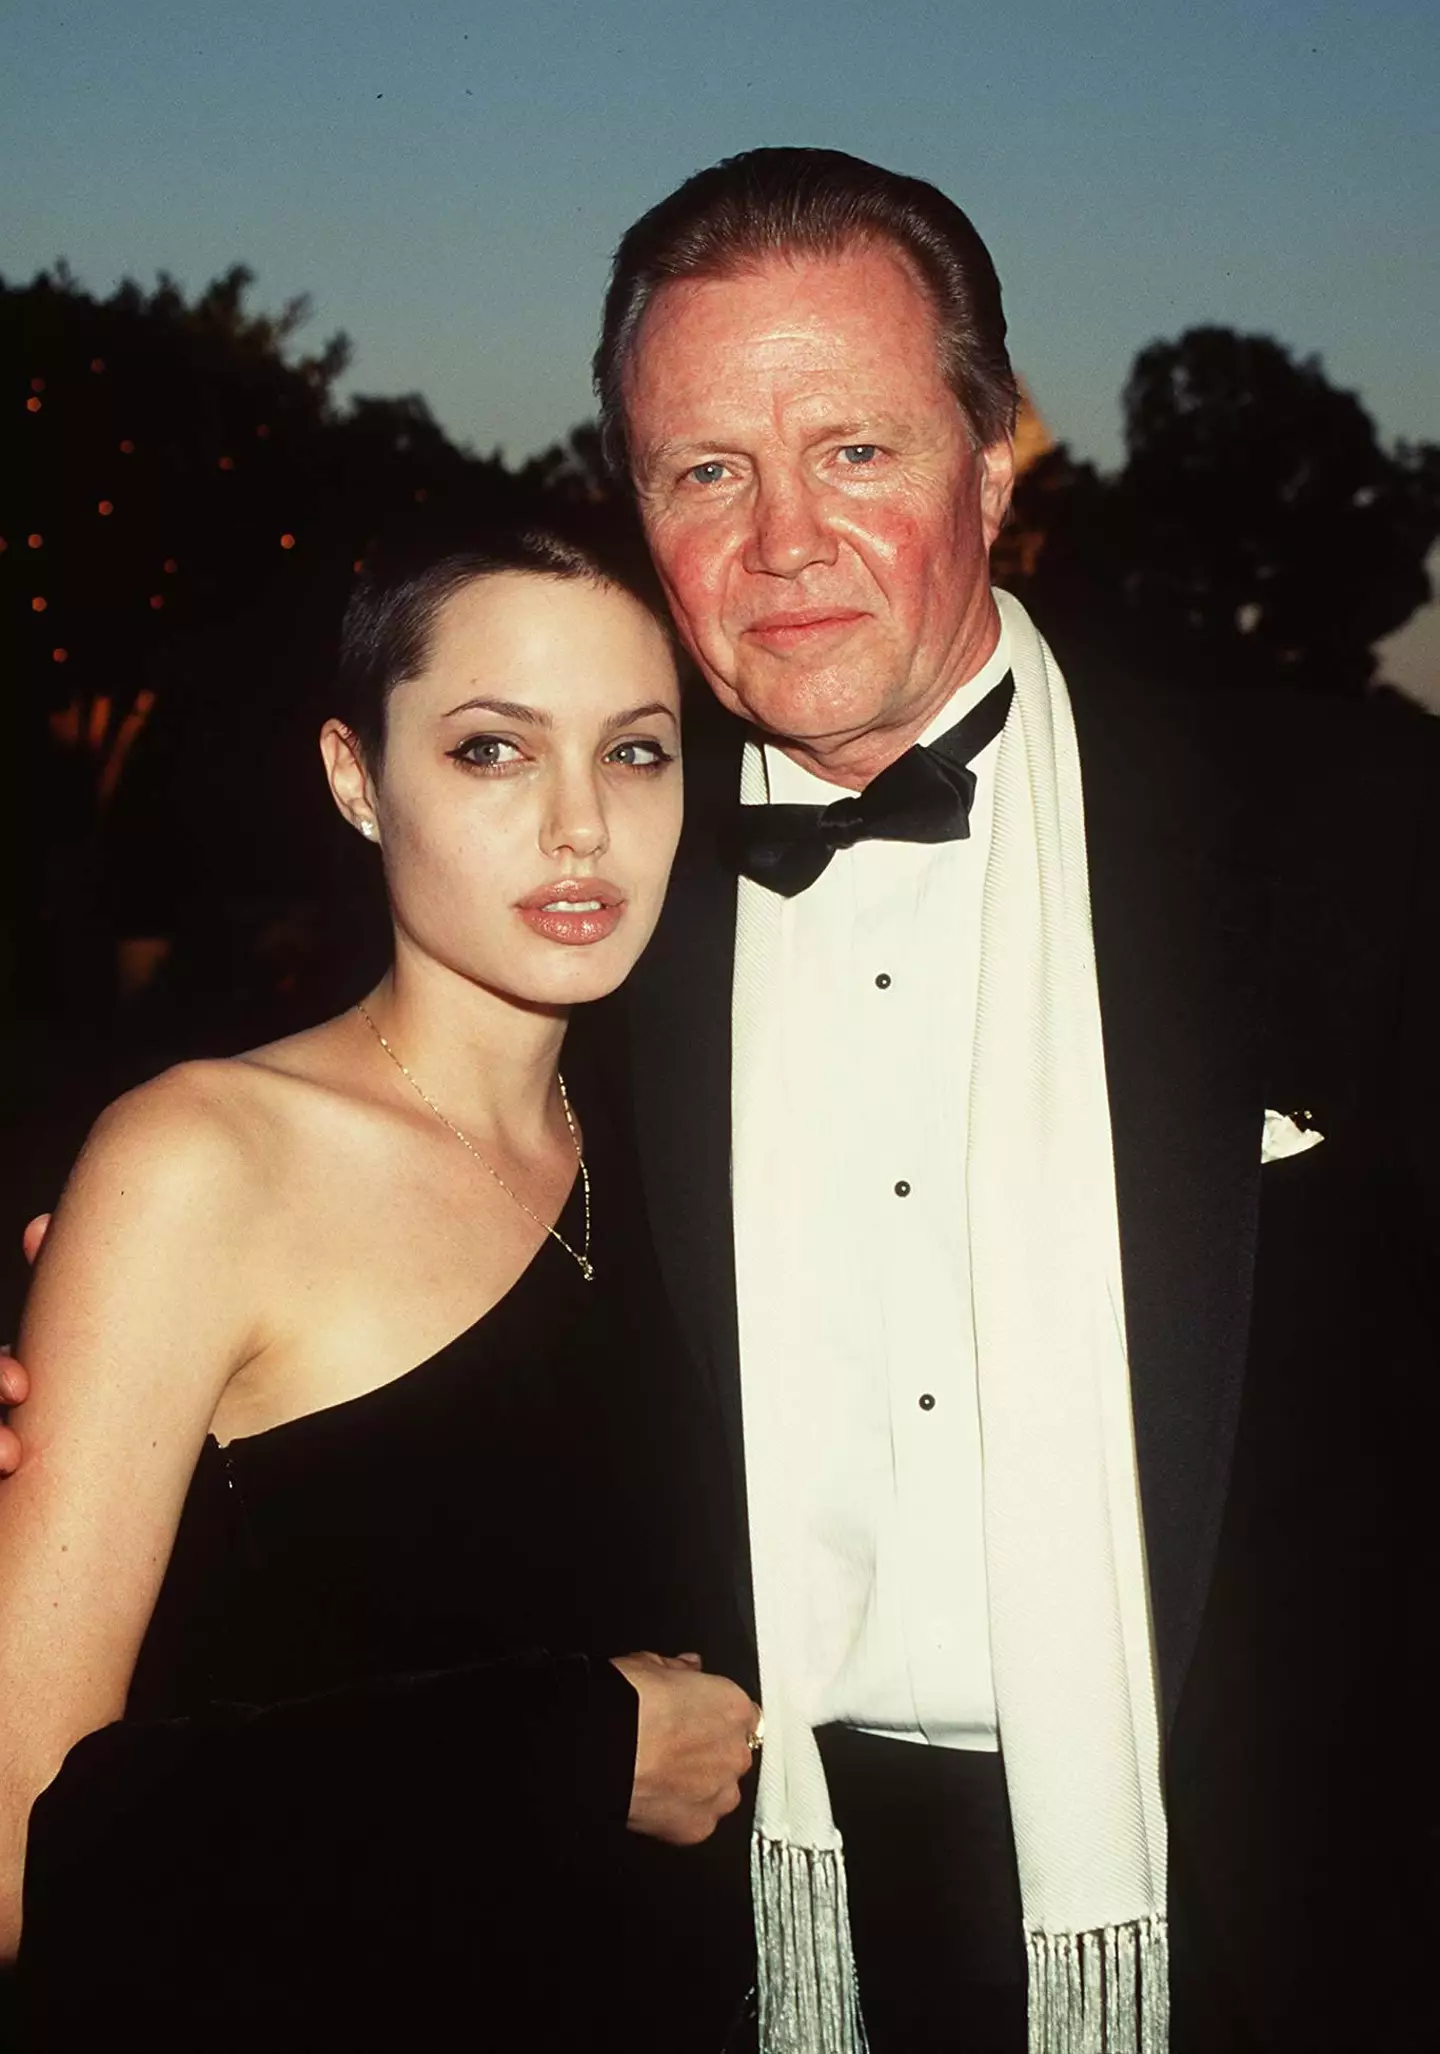 People are only just realising that Jon Voight is Angelina Jolie's dad.